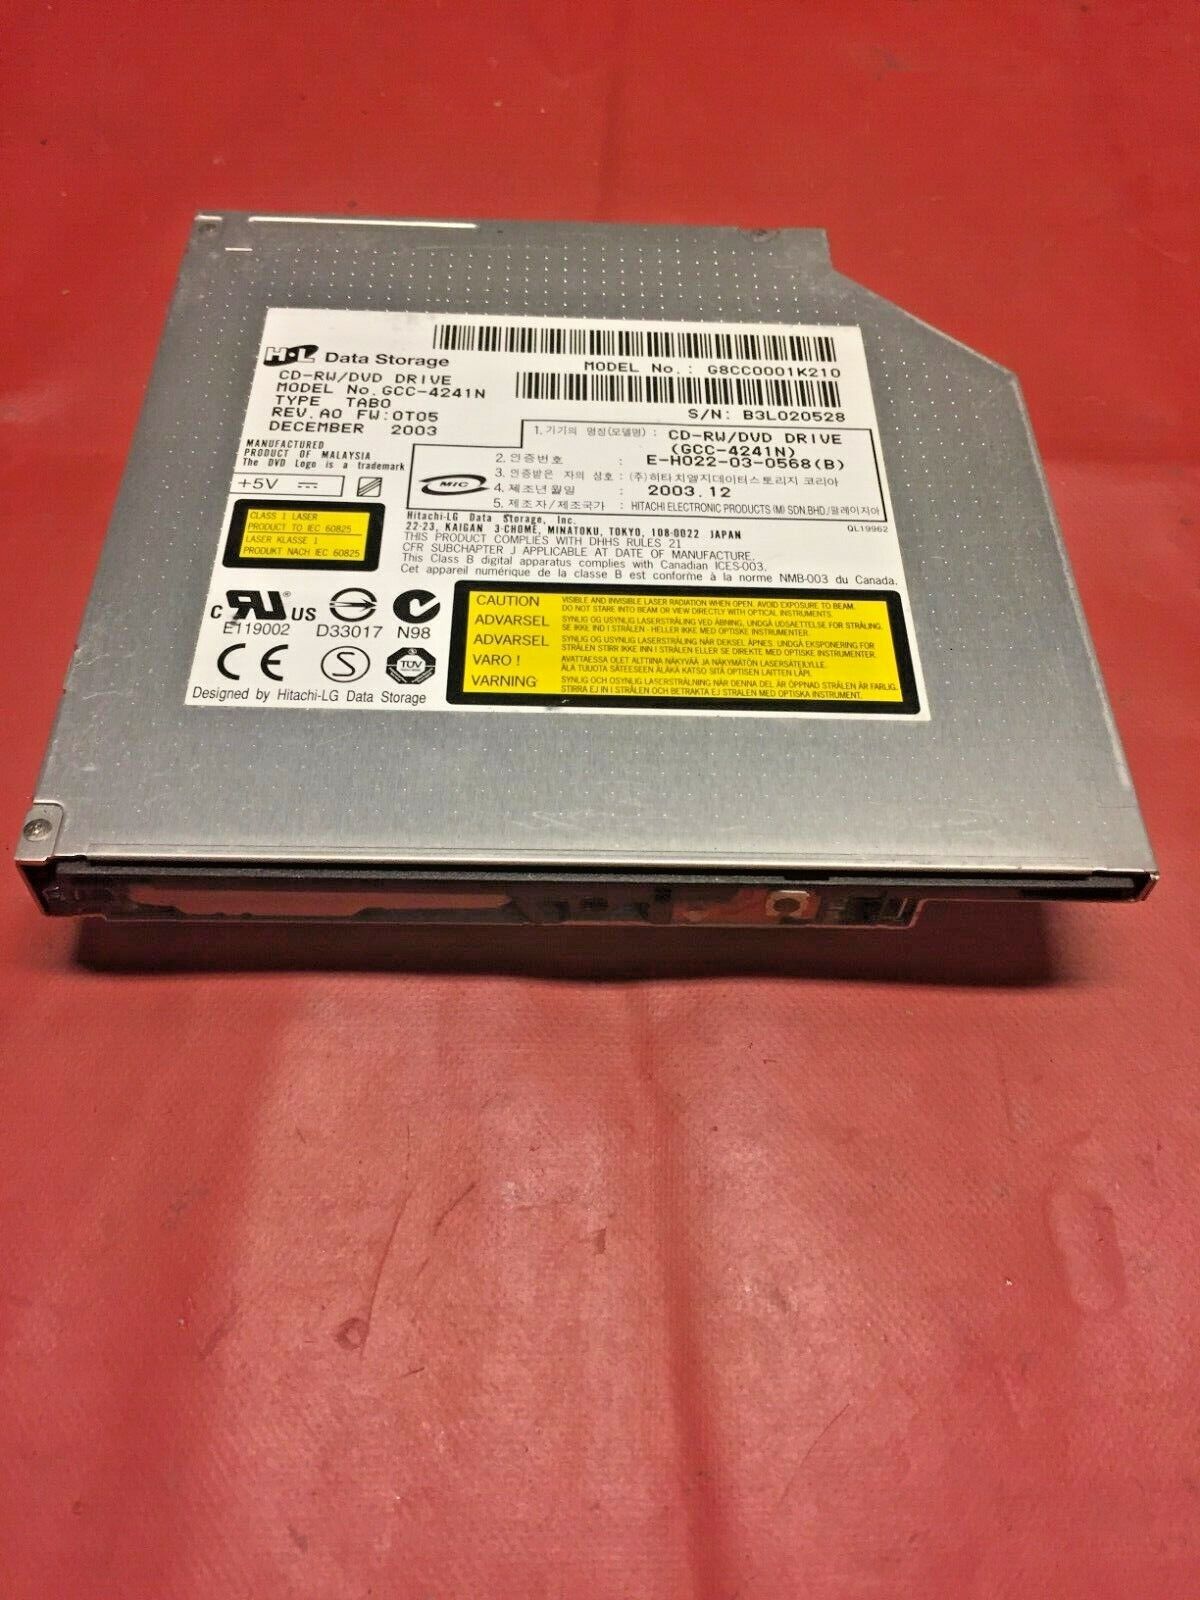 HLDS DVD/CD RW Drive GCC-4241N Tested and Works No Faceplate